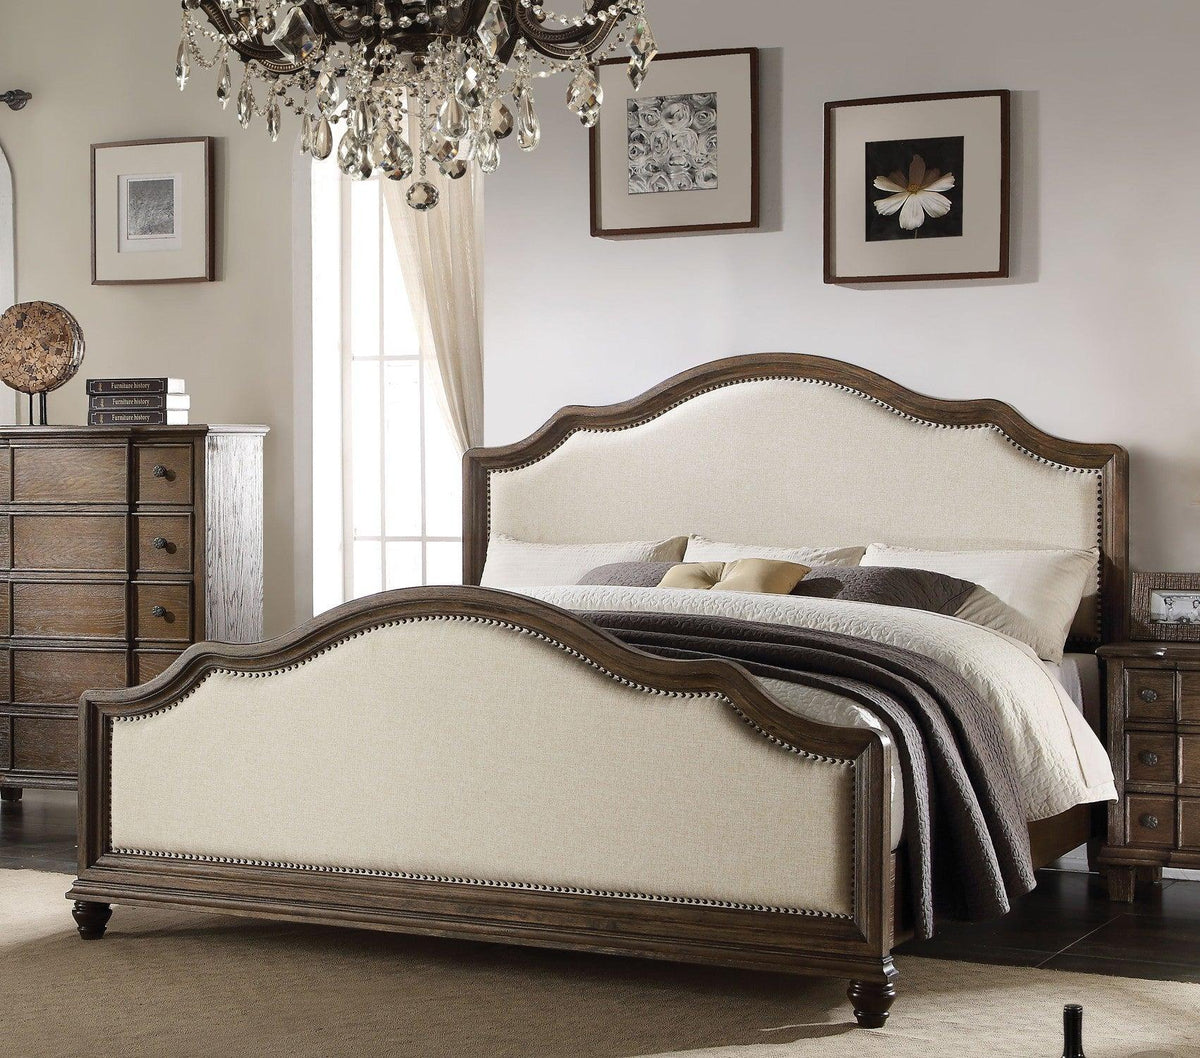 Acme Baudouin Upholstered Queen Bed in Weathered Oak 26110Q  Las Vegas Furniture Stores